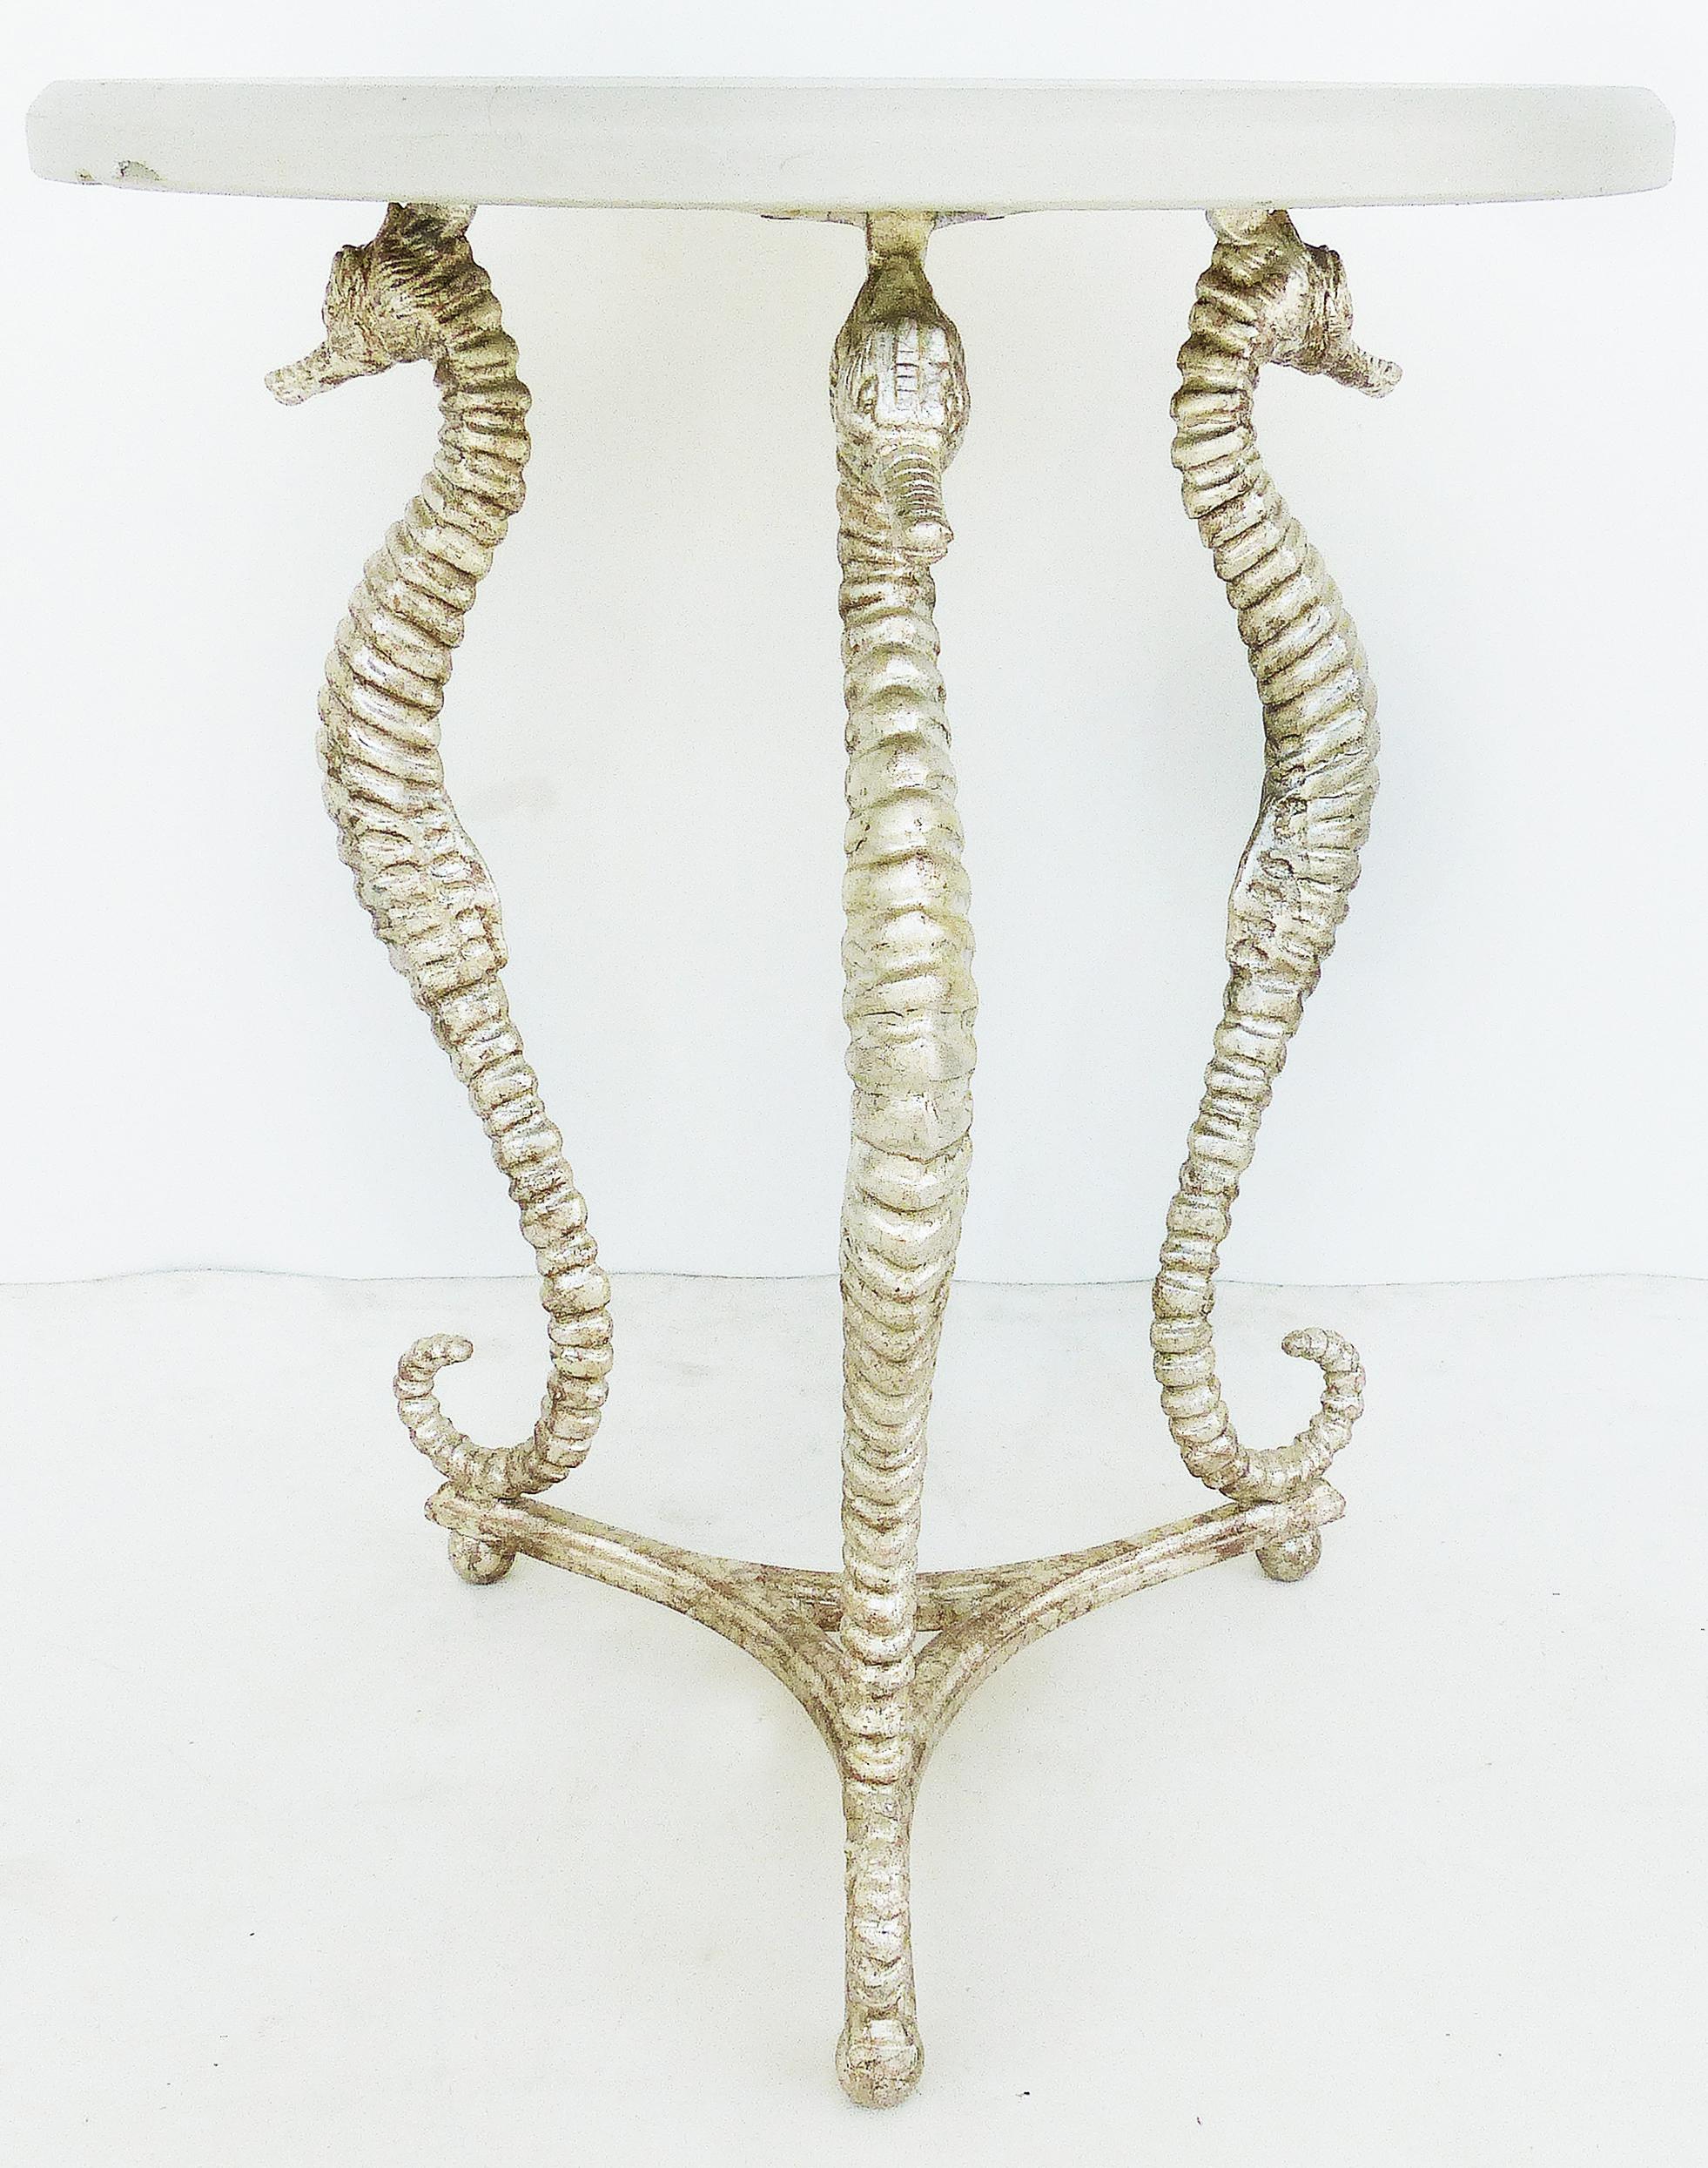 Vintage ironies seahorse silver-gilt side tables with cast stone tops

Offered for sale is a pair of side tables with cast stone tops and silver-gilt metal 